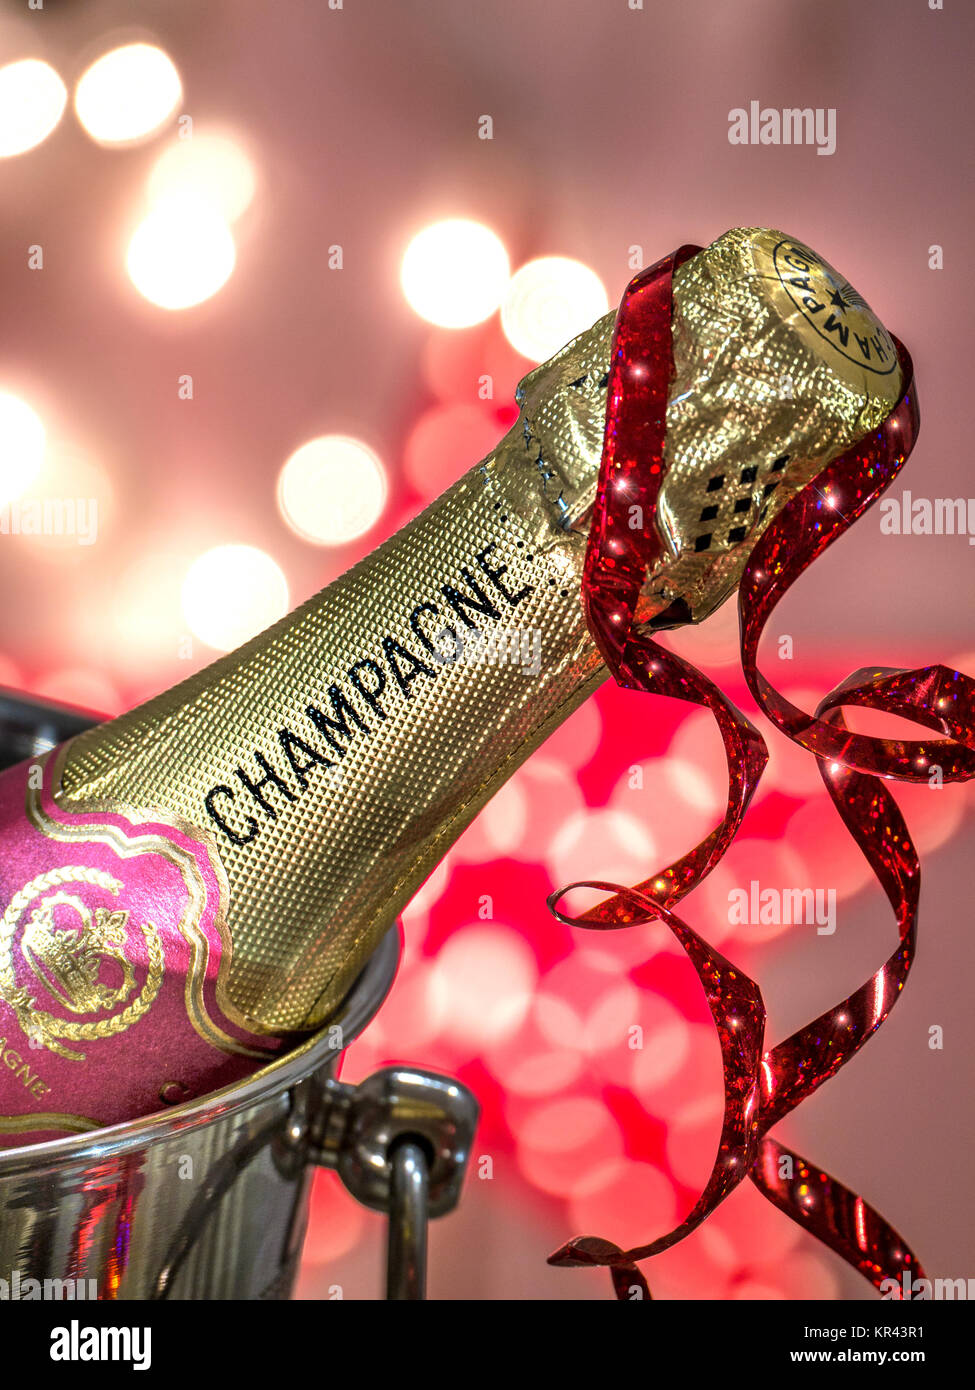 CHAMPAGNE PARTY LIGHTS Champagne bottle on ice in wine cooler with party streamer &  sparkling celebration lights Stock Photo